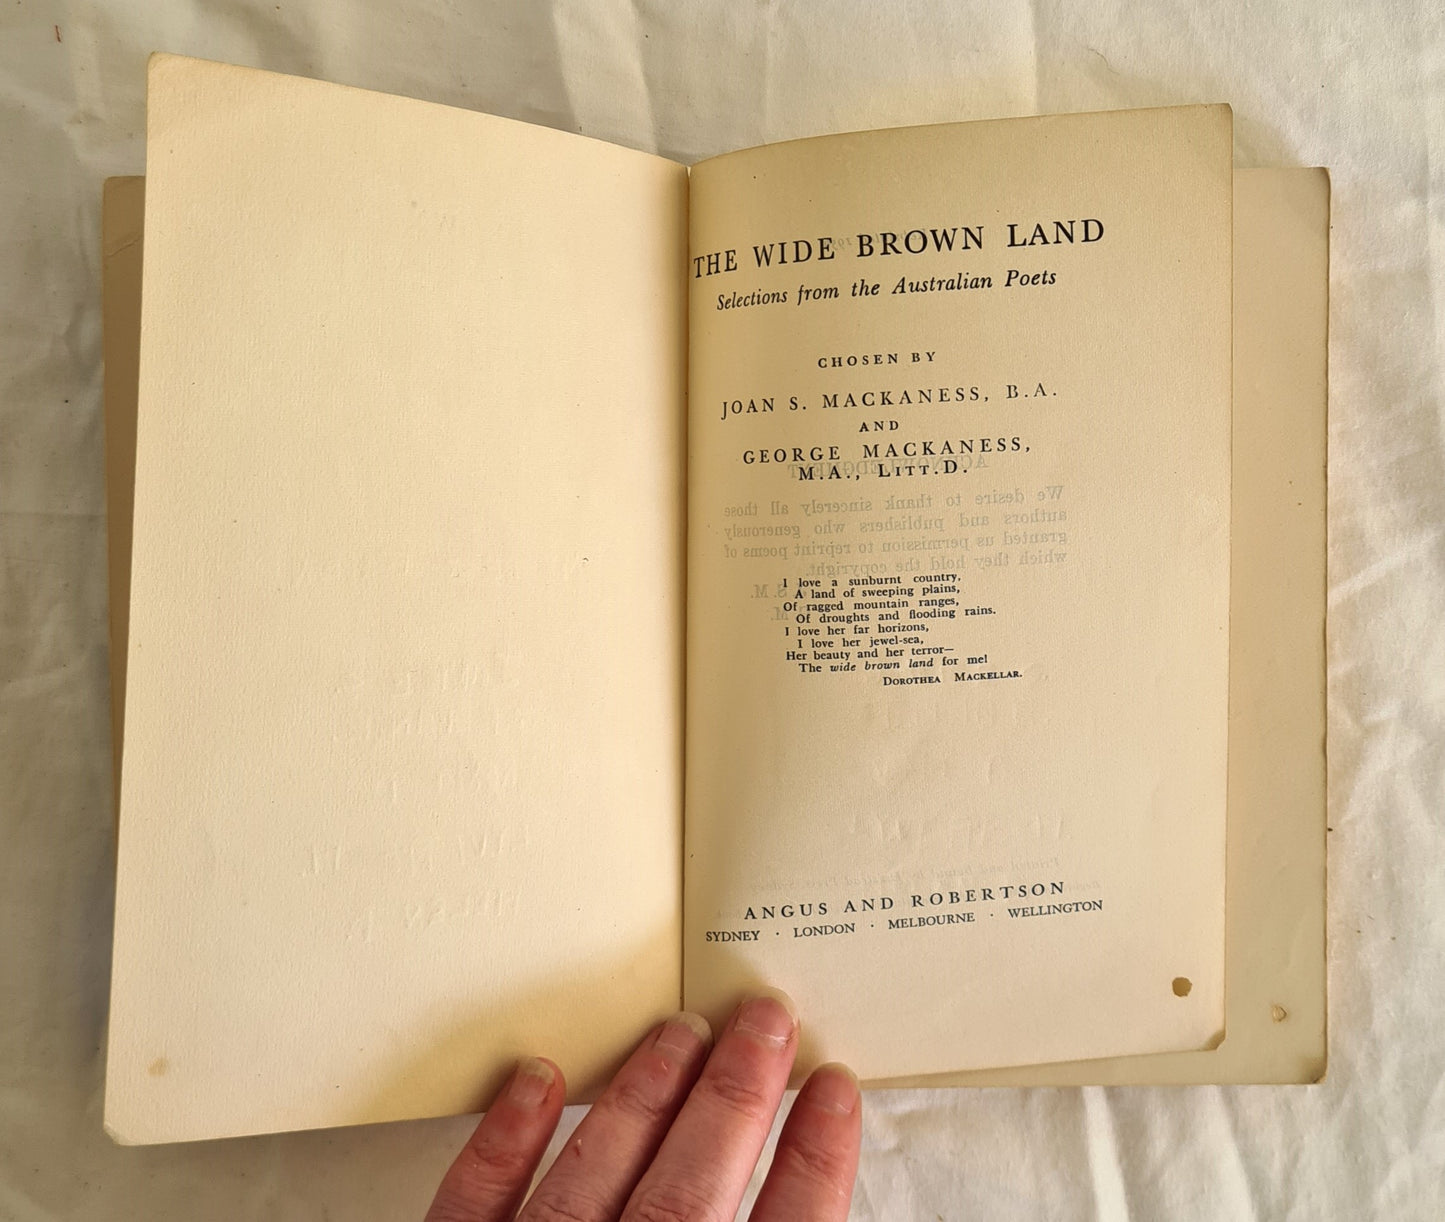 The Wide Brown Land by Joan S. Mackness and George Mackness